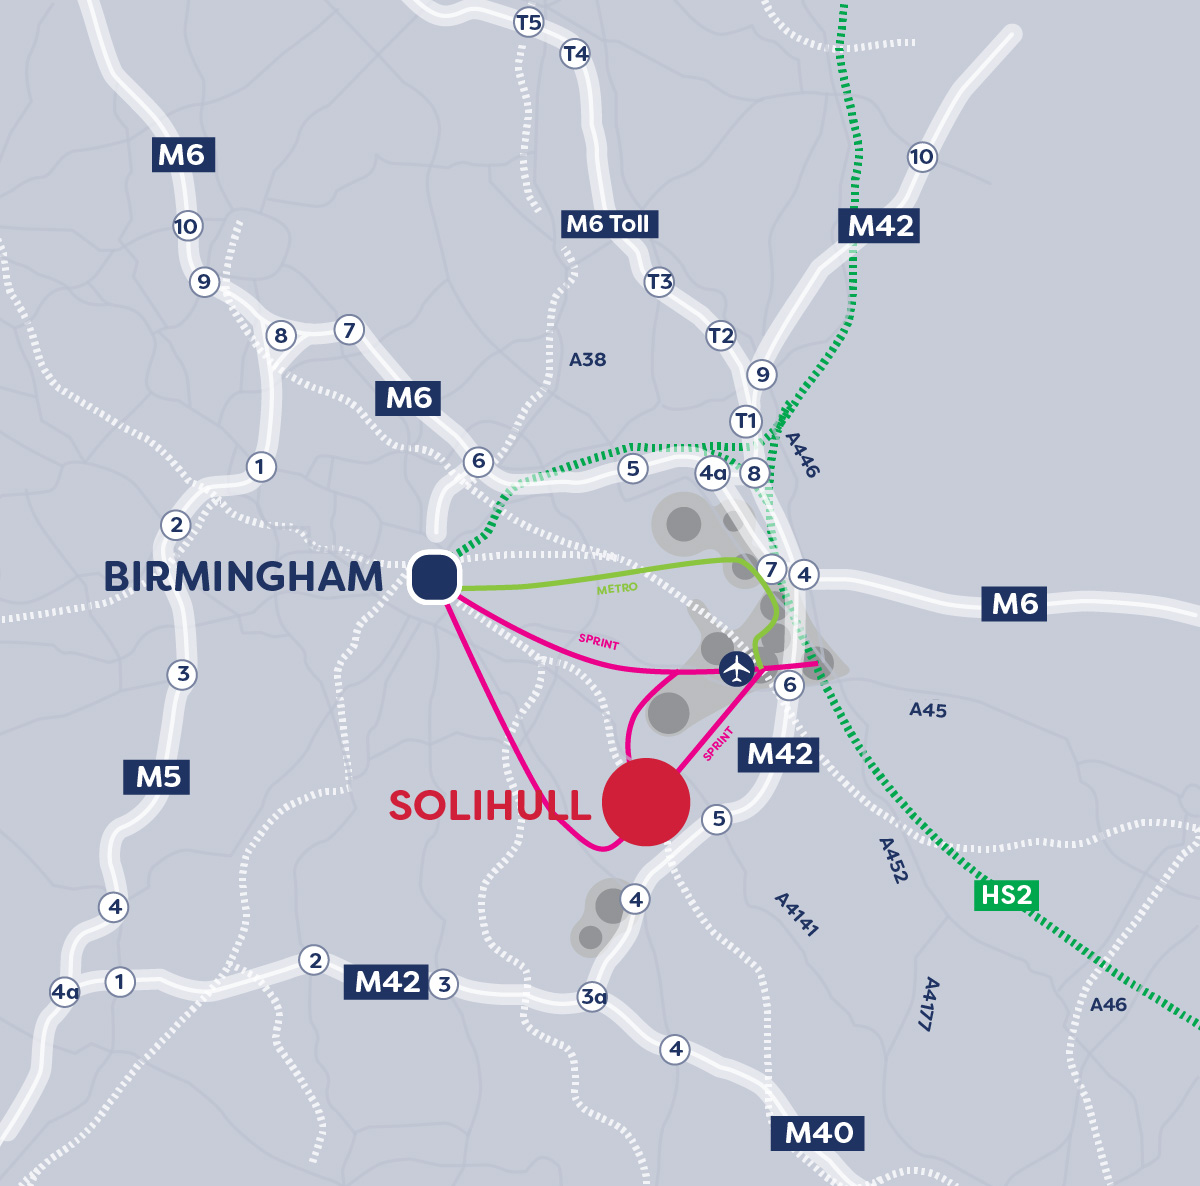 A map showing Solihull's location and transport links.